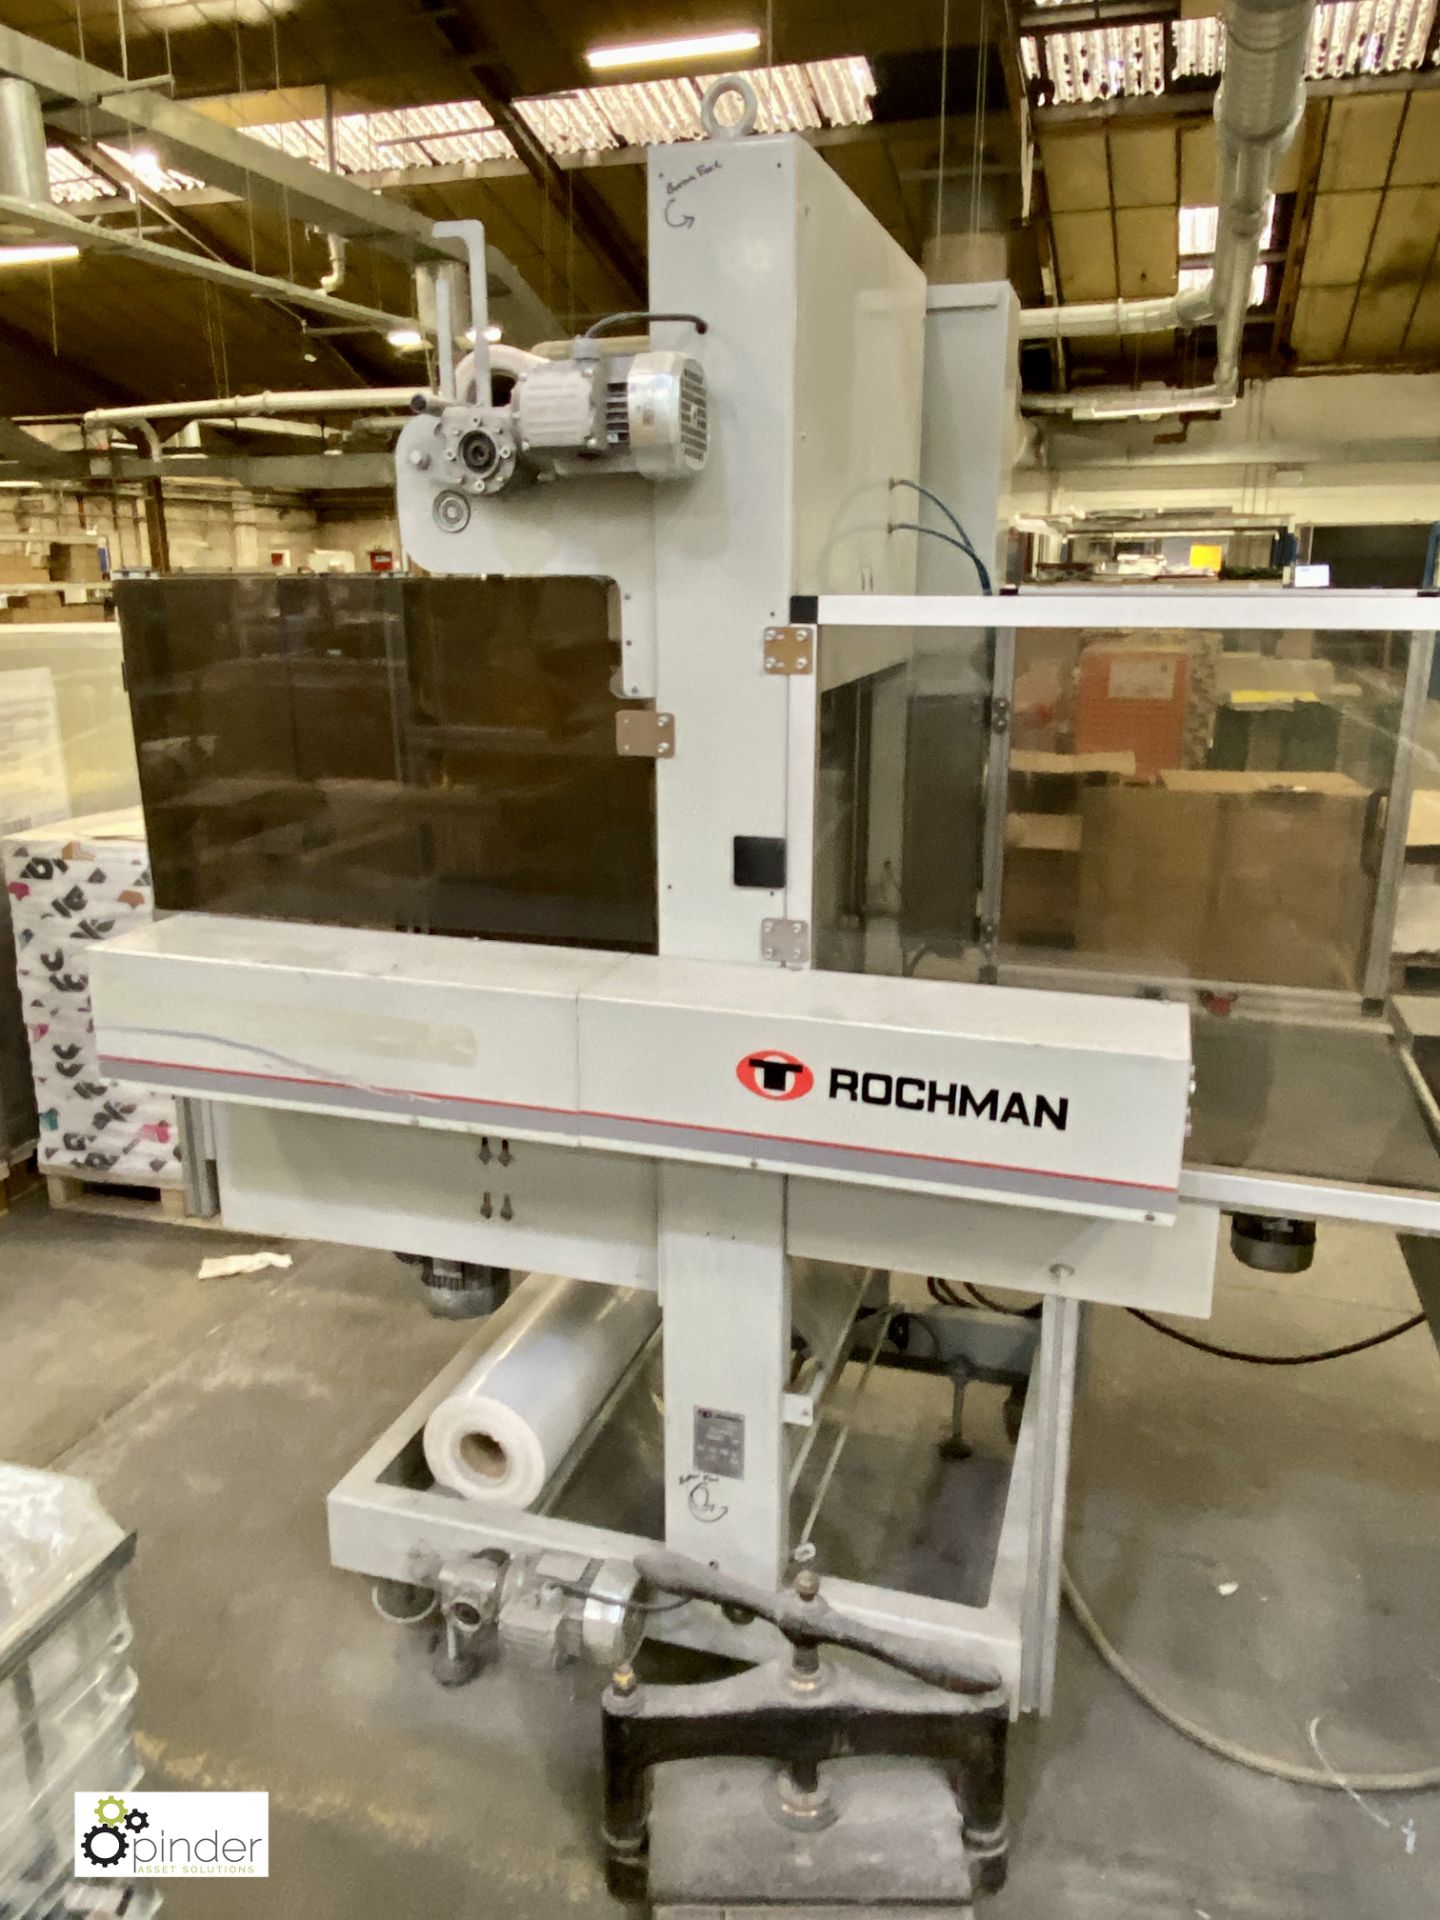 Rochman SVA60/35 Sleeve Sealer, 400volts, serial number 4881206, year 2007, with Rochman TR65/ - Image 8 of 15